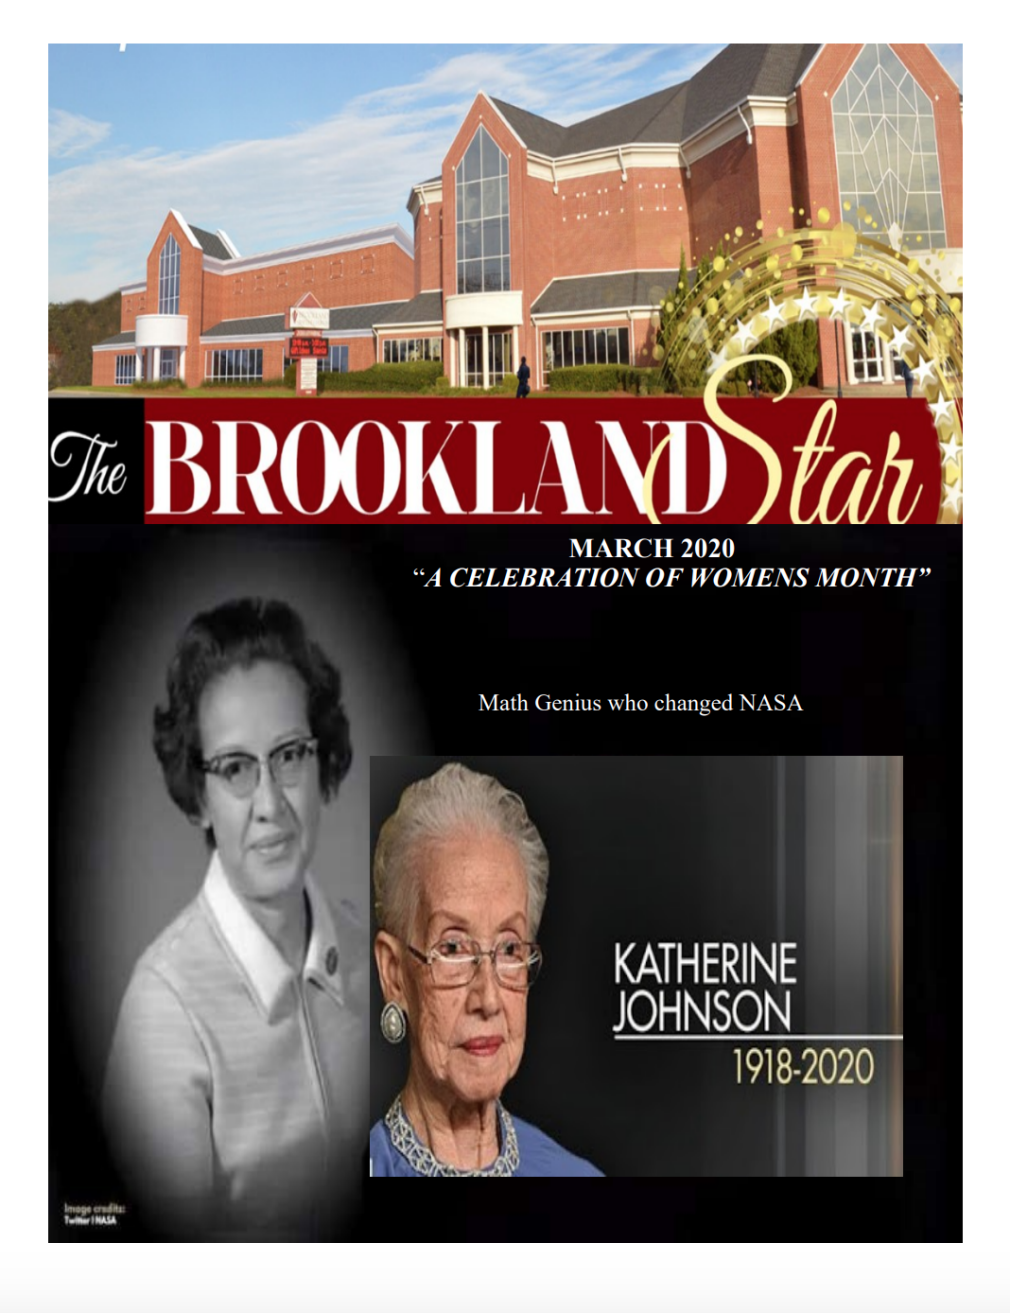 The Brookland Star March 2020 Edition